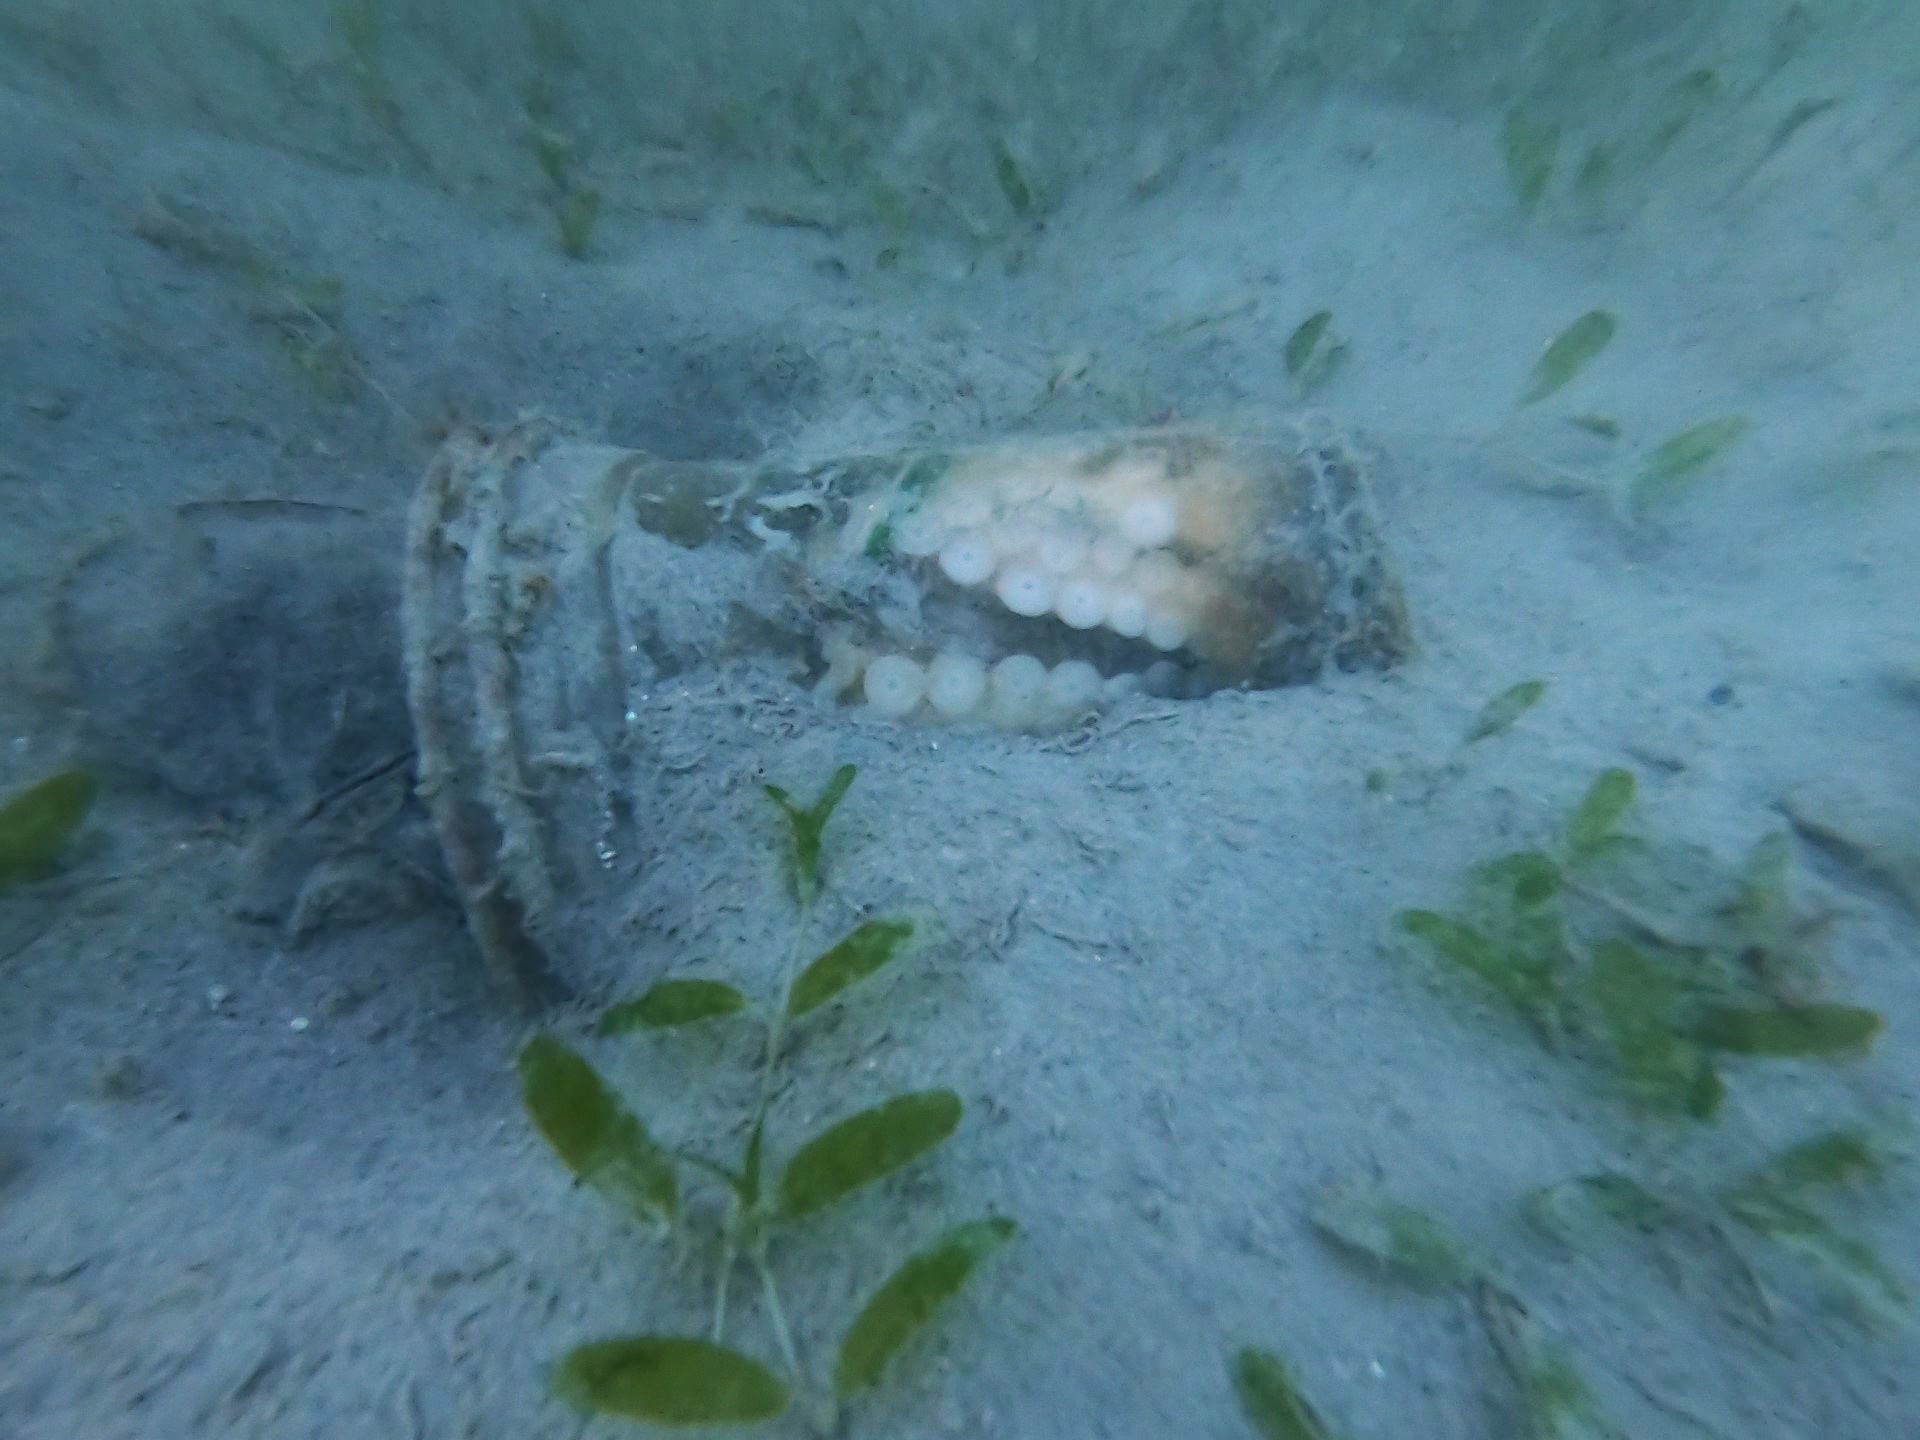 An octopus inside of a clear plastic cup on the ocean floor that was seen while diving at Point Panic